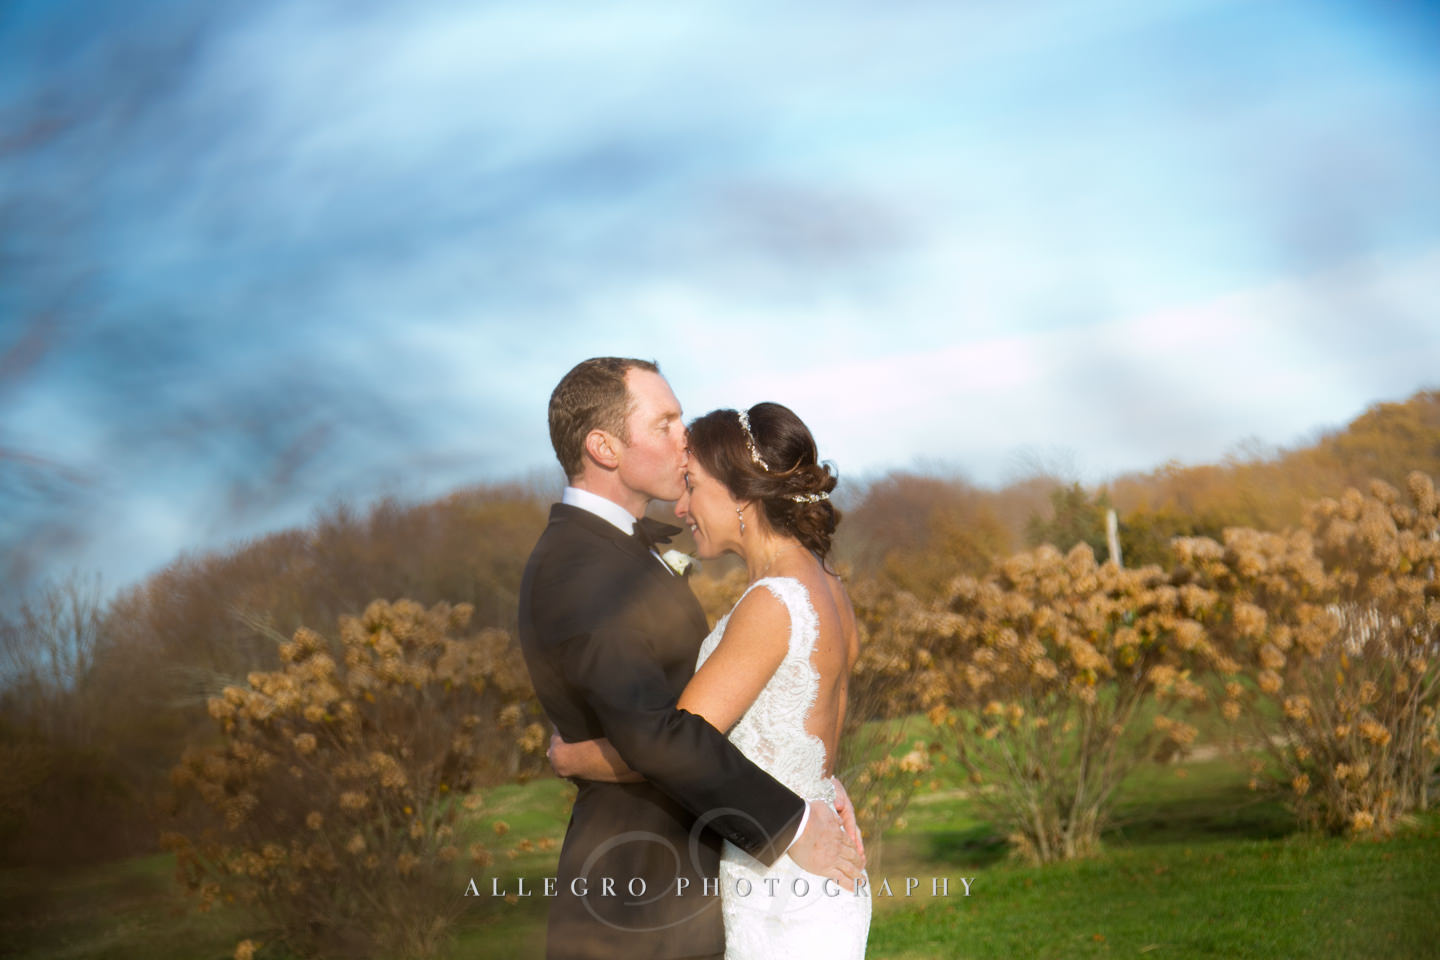 kiss on the forehead -photo by Allegro Photography